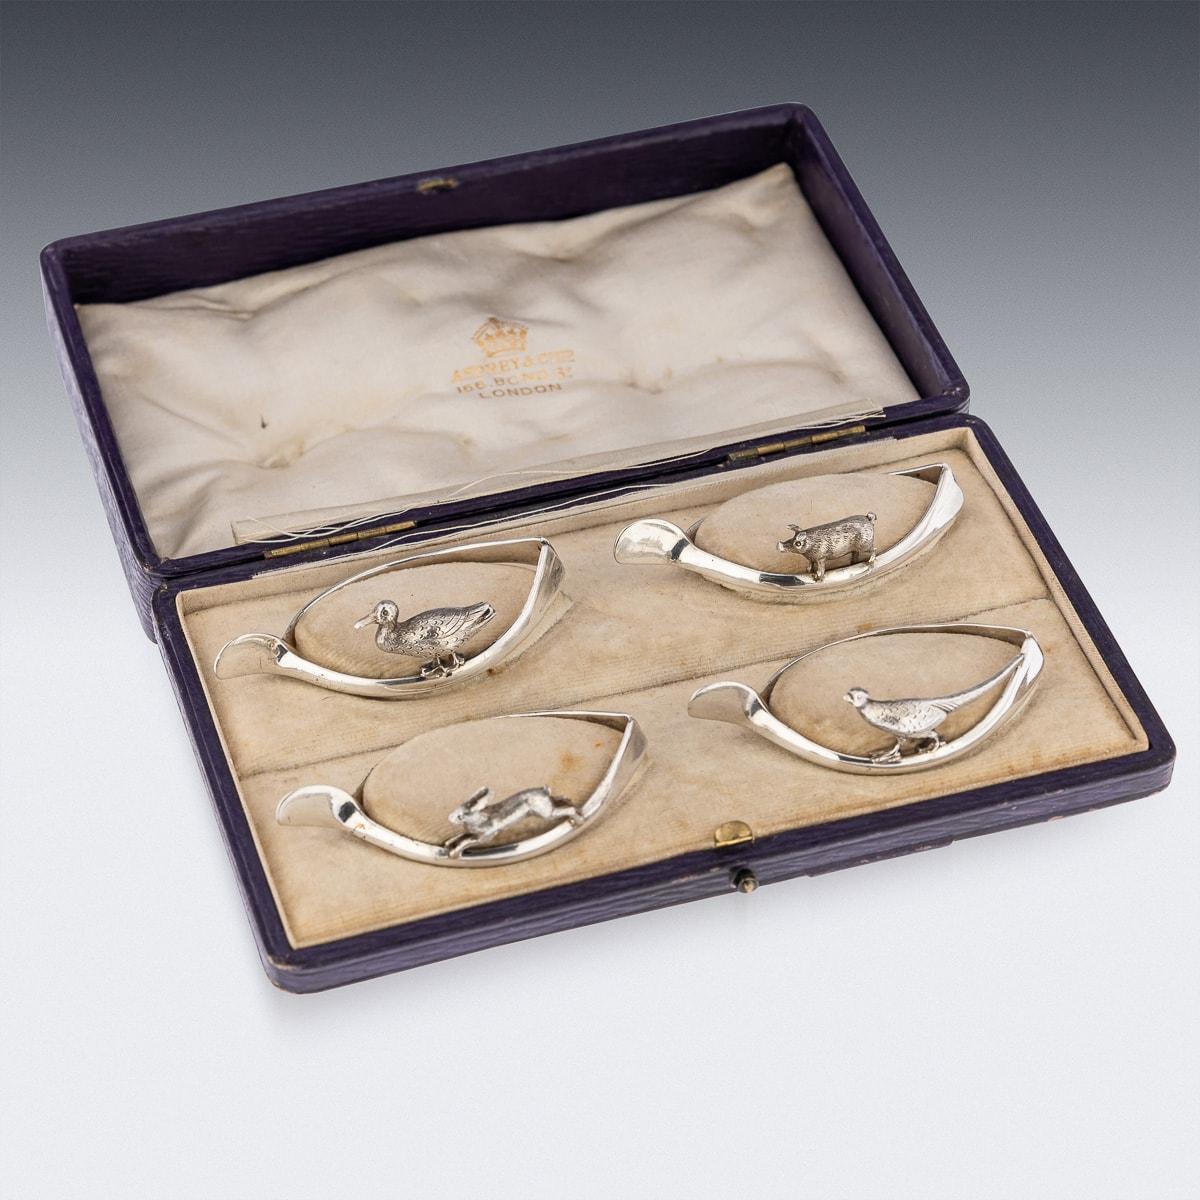 Antique 20th Century stunning set of four solid silver 'lucky animals' napkin rings. Each napkin holder is in a shape of a wishbone and mounted with cast animals, depicting a duck, pig, rabbit and a pheasant. The set comes in an original retail